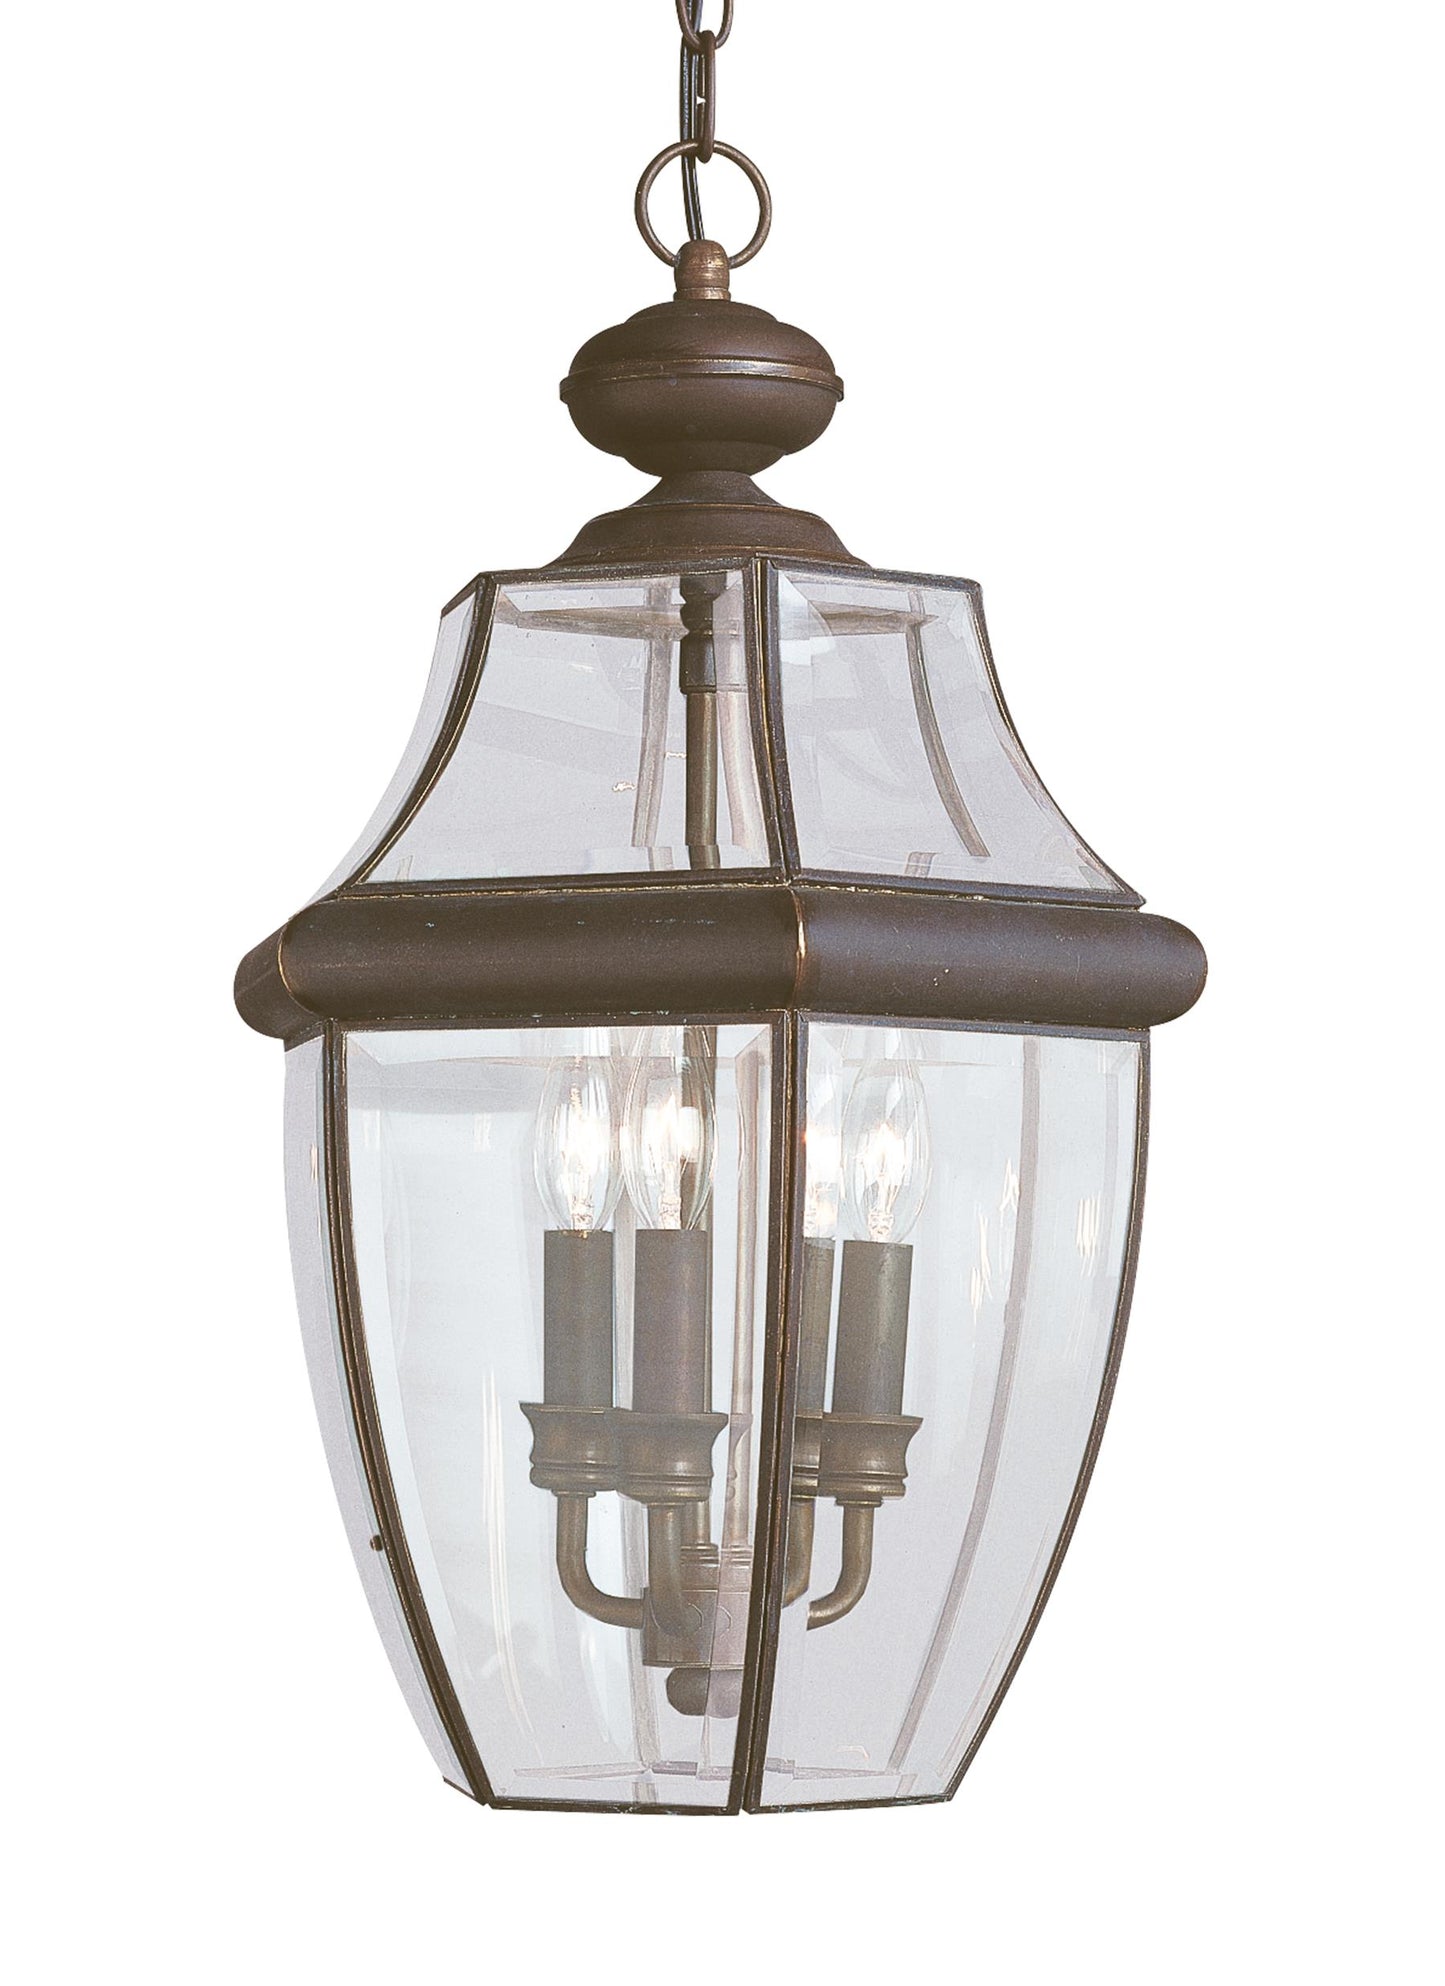 Lancaster traditional 3-light outdoor exterior pendant in antique bronze finish with clear curved beveled glass shade